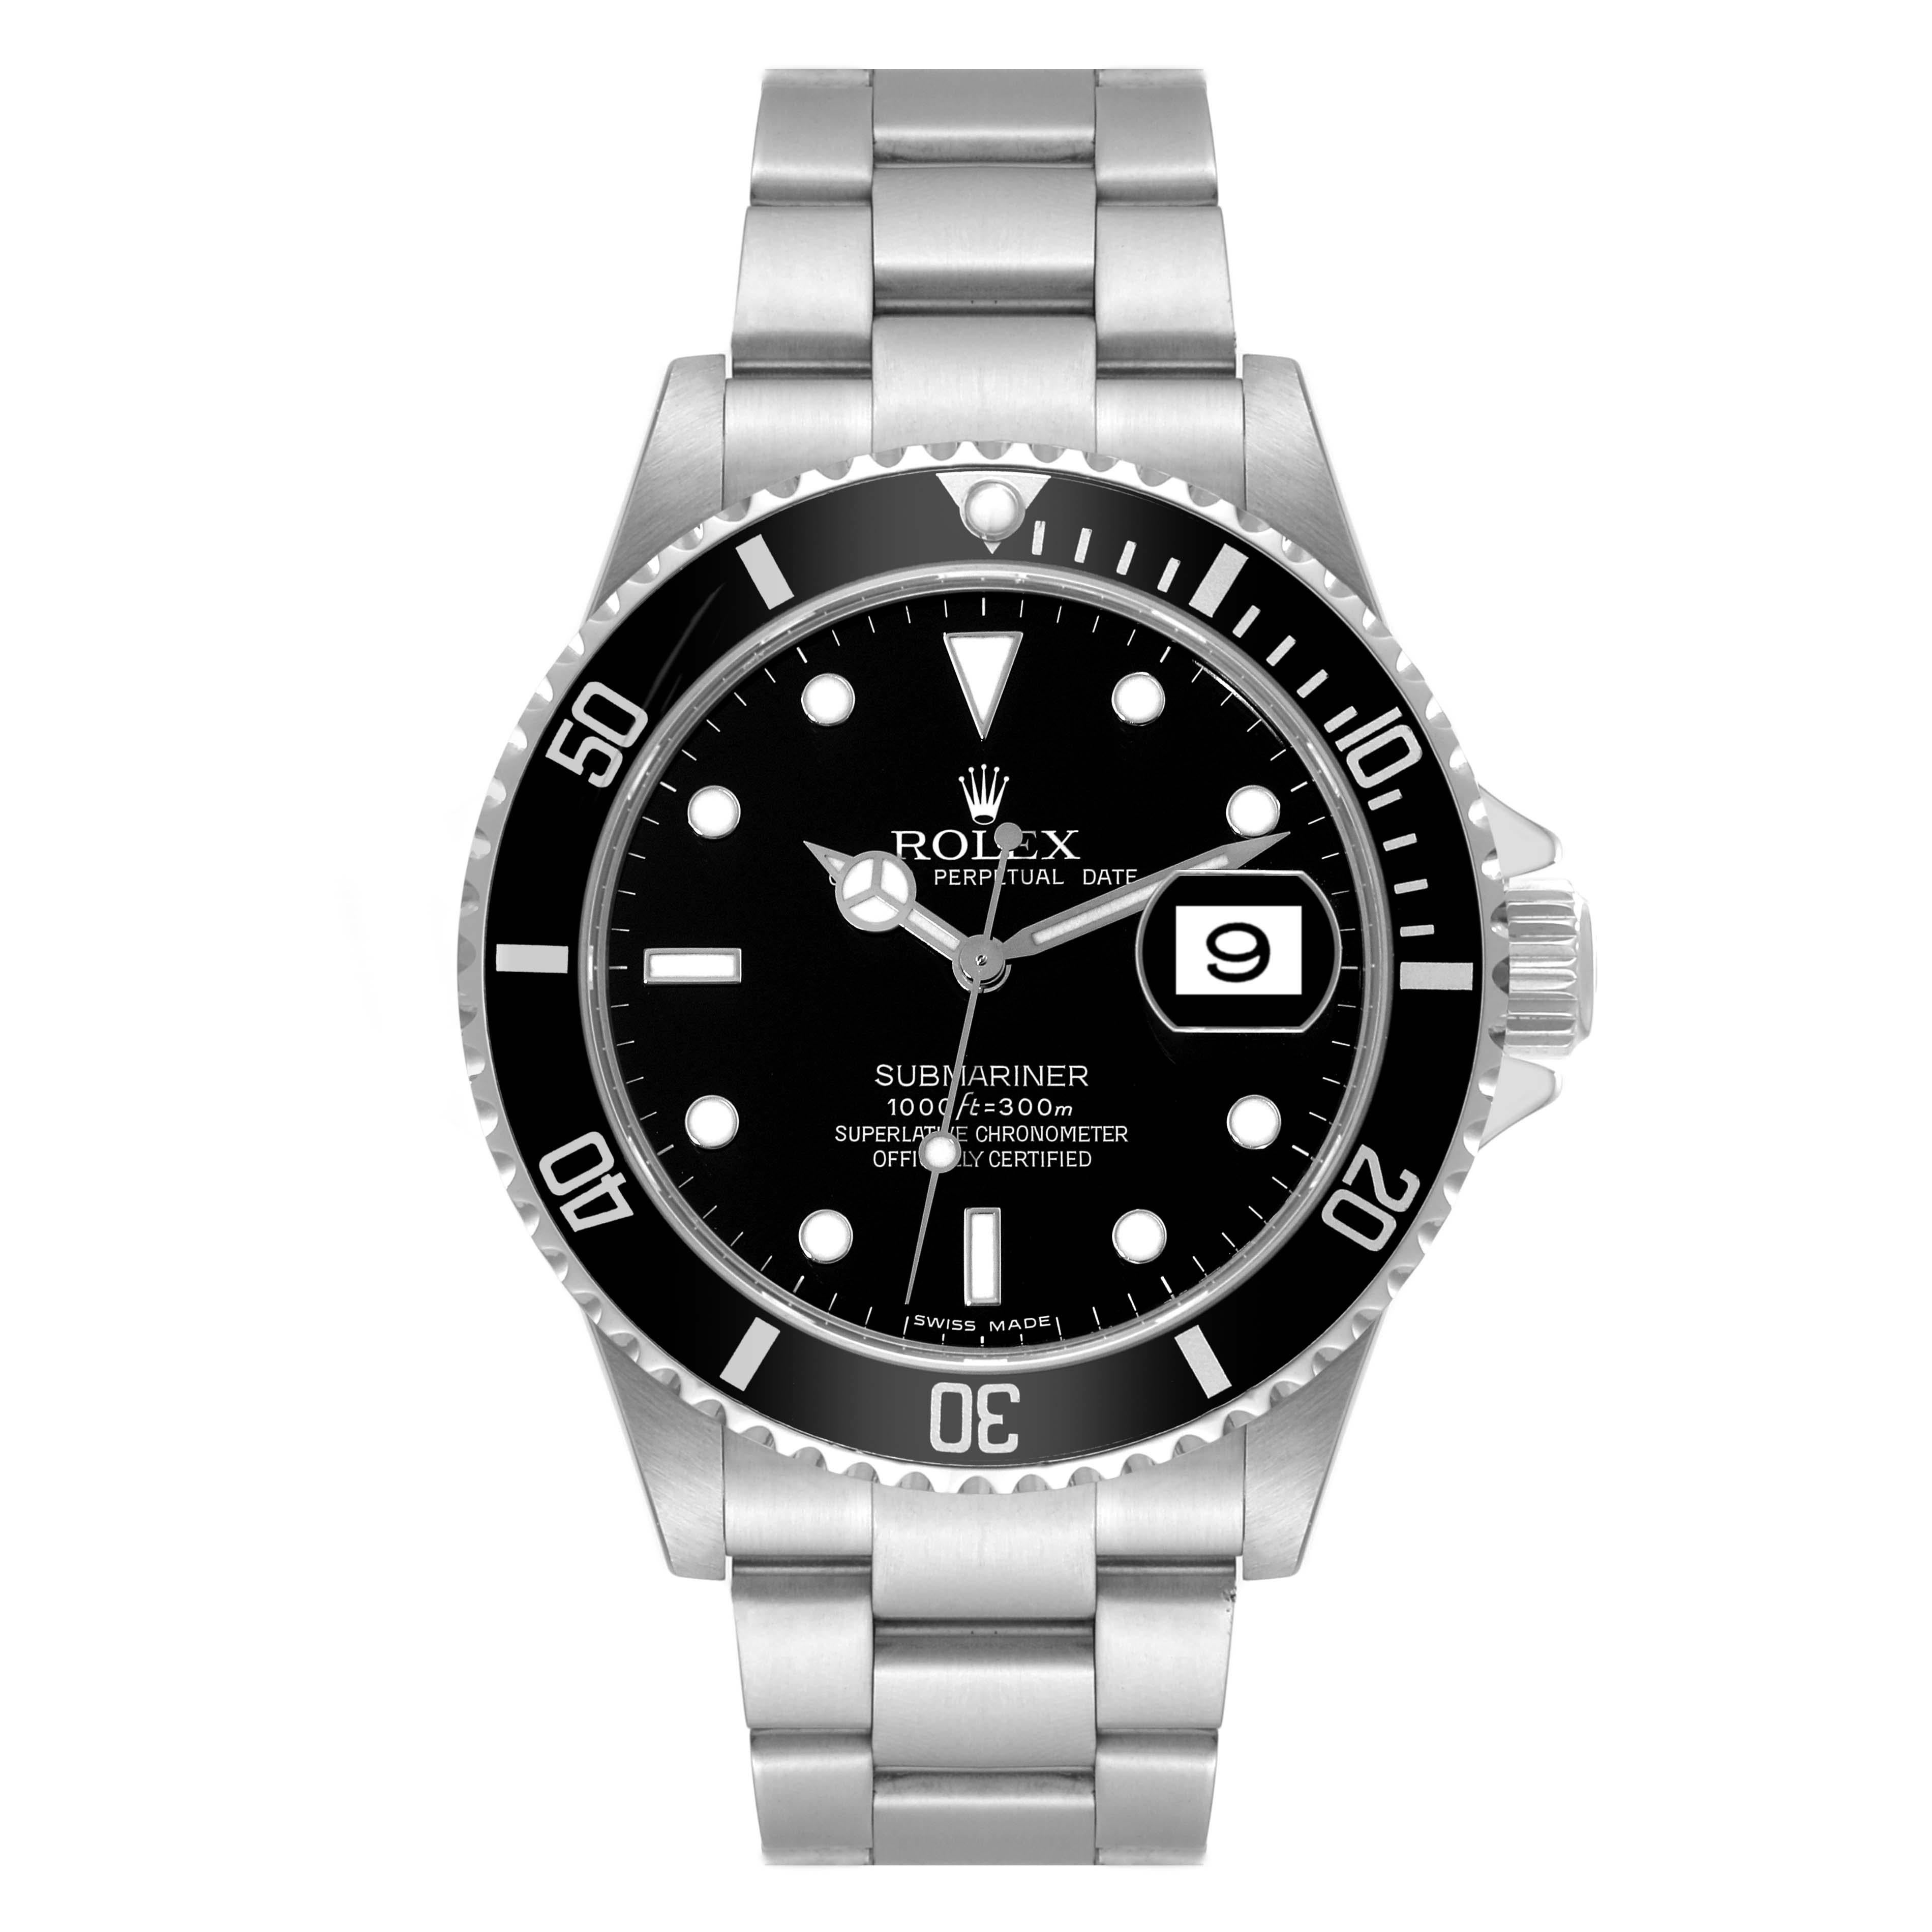 Rolex Submariner Date Black Dial Steel Mens Watch 16610. Officially certified chronometer automatic self-winding movement. Stainless steel case 40.0 mm in diameter. Rolex logo on the crown. Special time-lapse unidirectional rotating bezel. Scratch